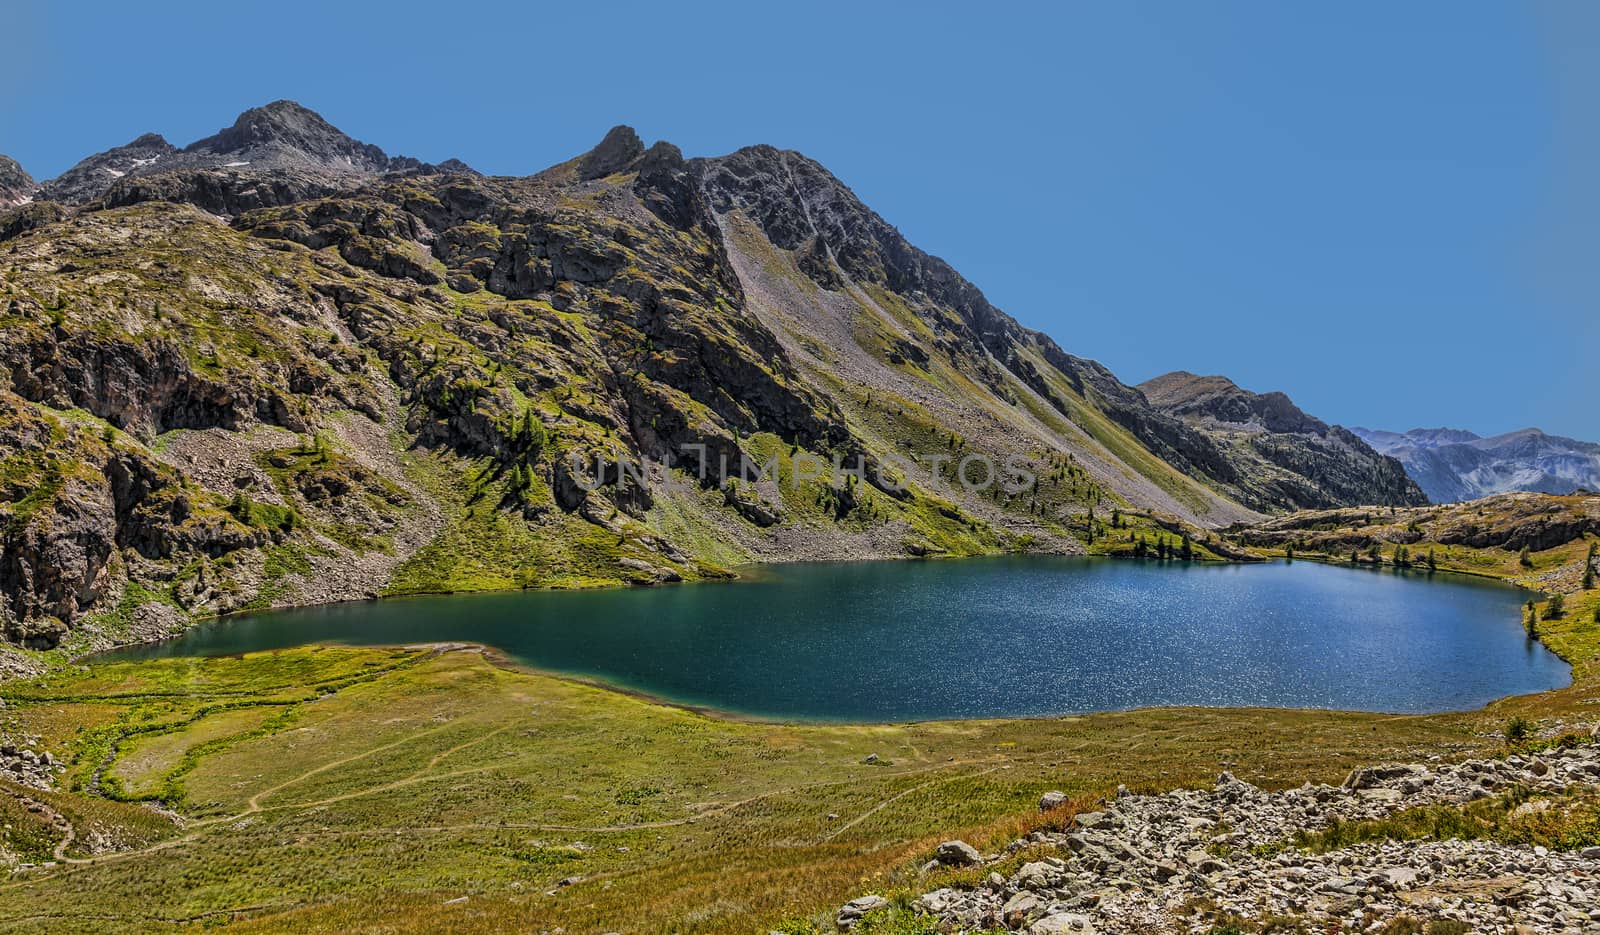 Image of the Big Lake from the Vens Lakes located at 2327 m in Maritime Alps in Mercanotur Park in the south of France. The Vens Lakes are a set of five lakes flowing one in the other